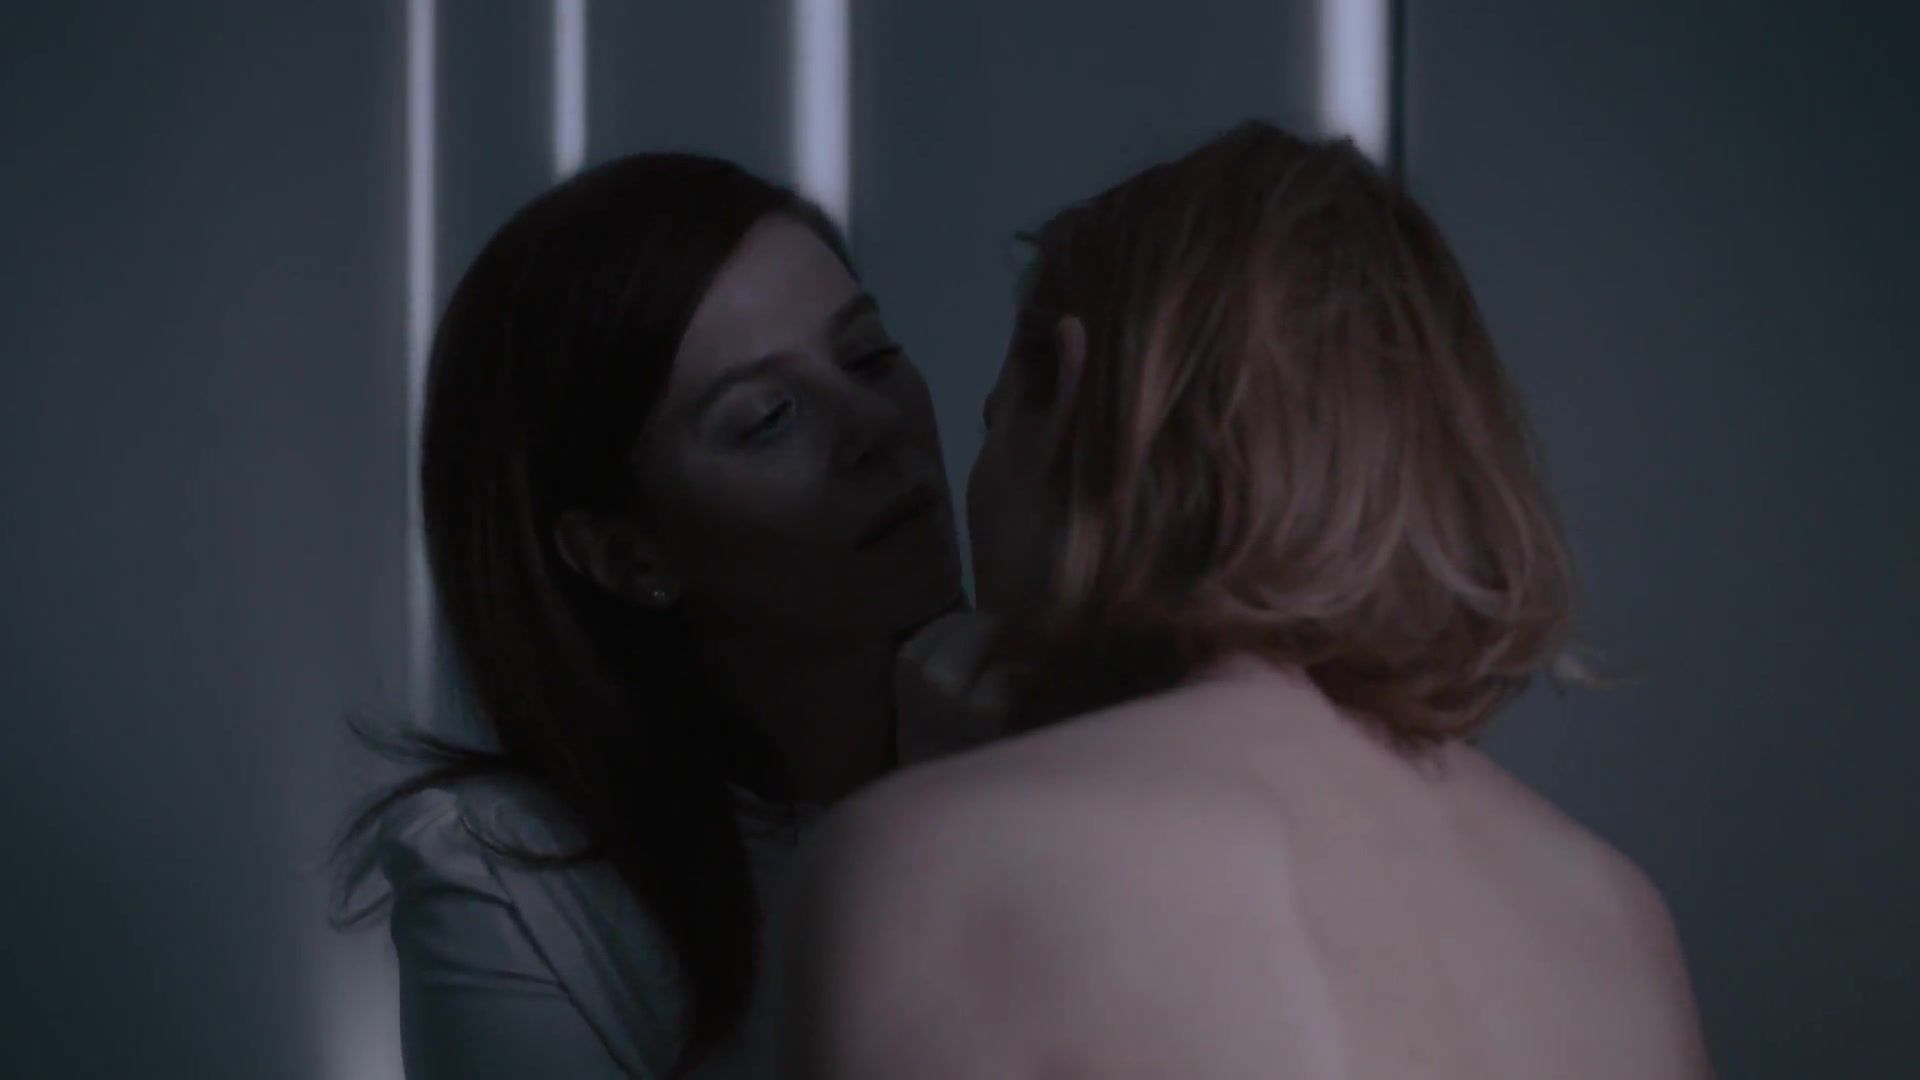 Spank Louisa Krause, Anna Friel nude – The Girlfriend Experience S02E07 (Explicit Blowjob and Lesbian Sex) Foot Worship